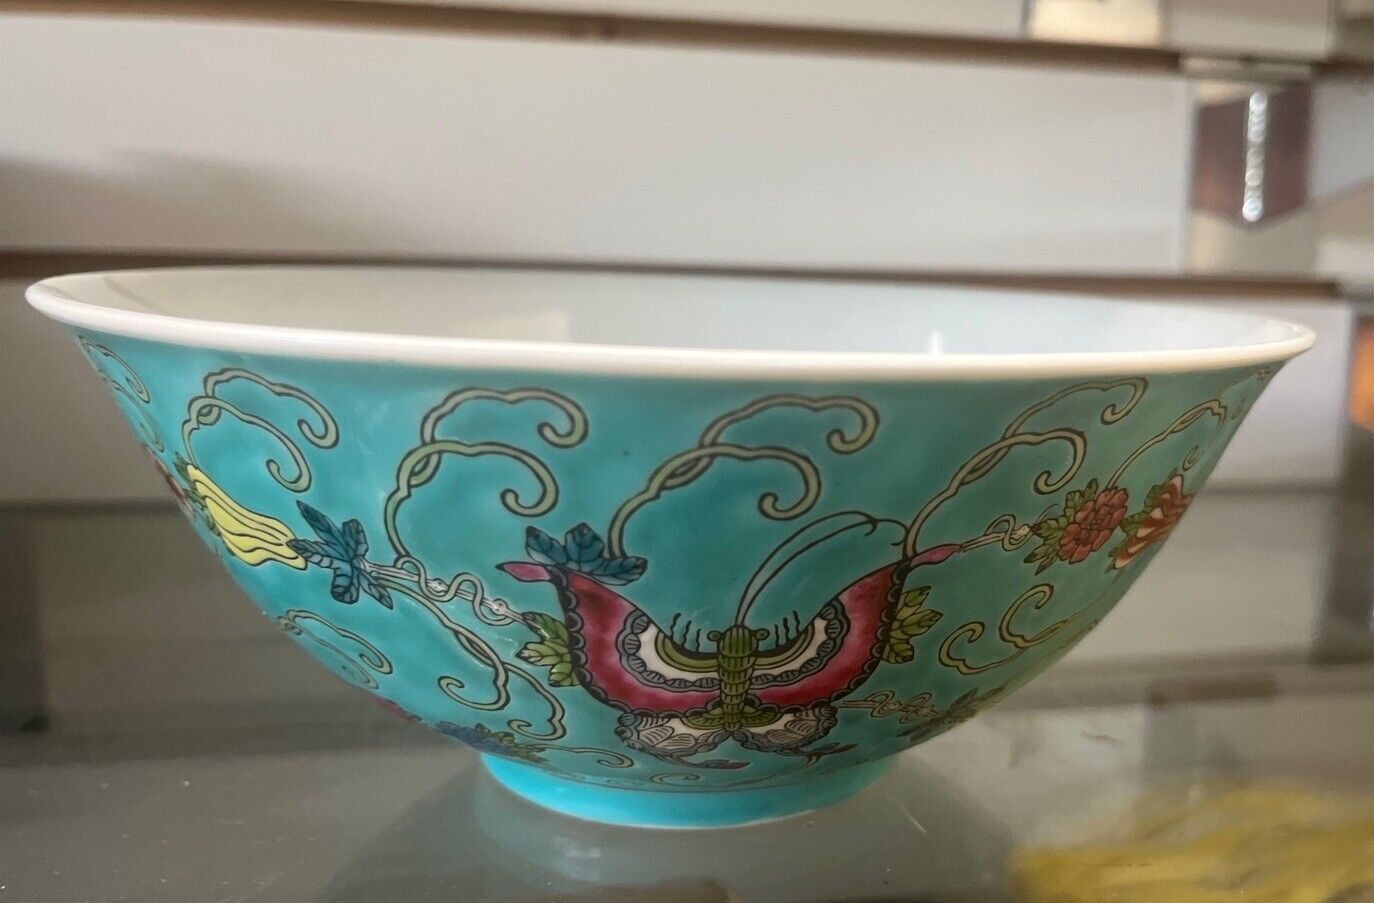 7.5x3” bowl Famille Verte Rose Turquoise Chinese Butterfly handpainted